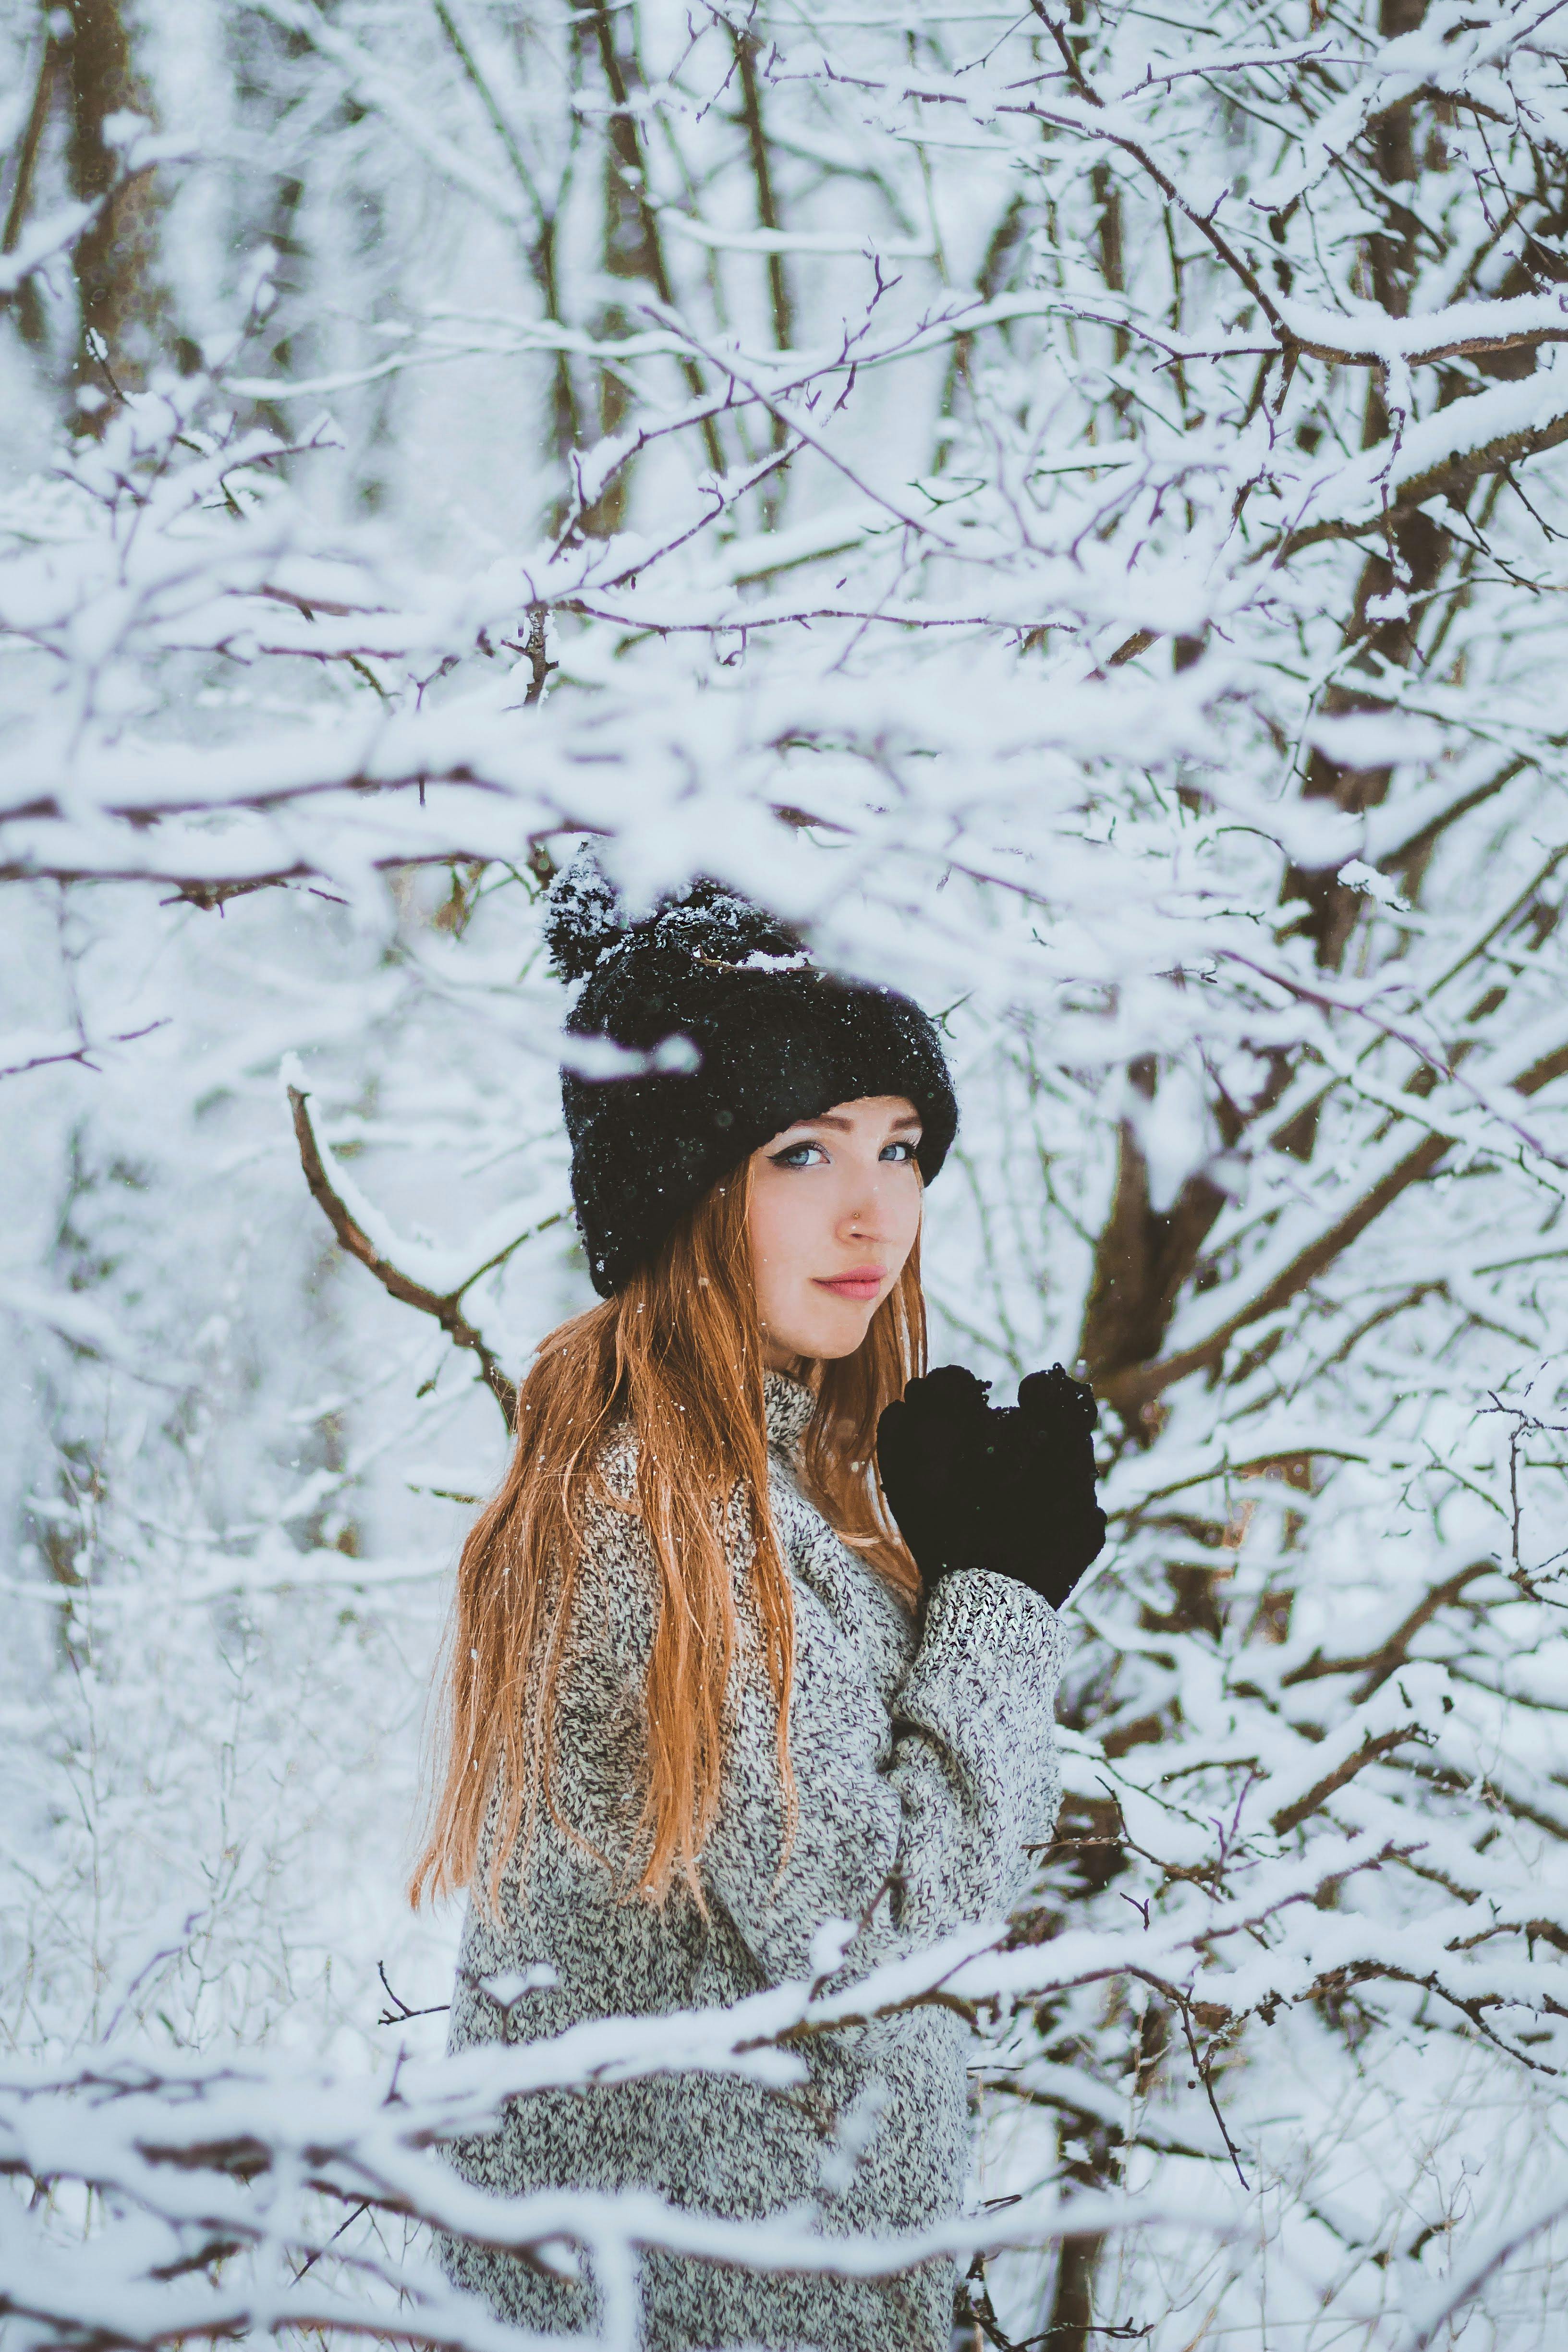 79,429 Winter Fashion Woman Forest Images, Stock Photos, 3D